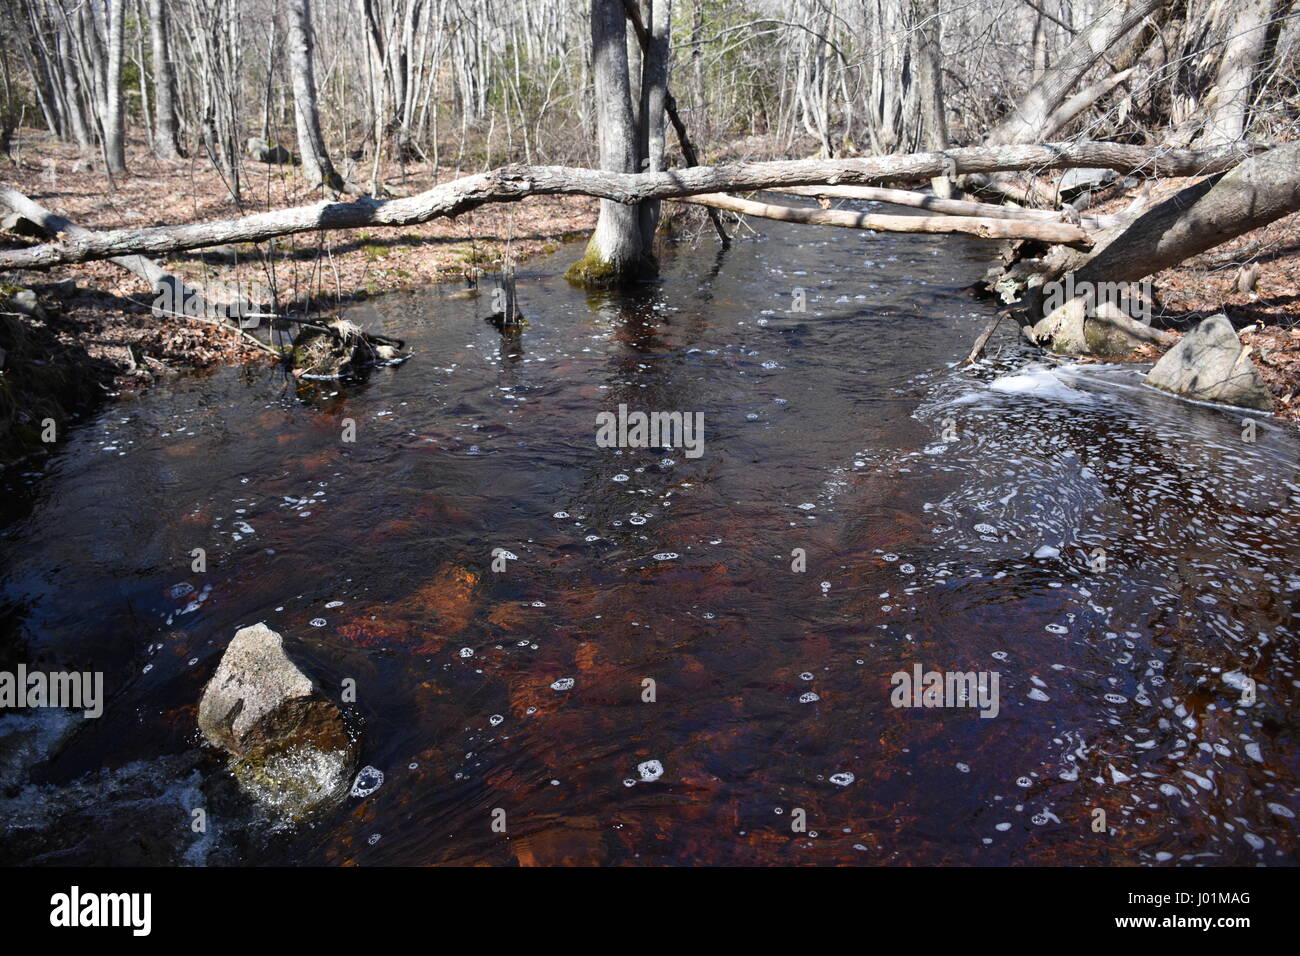 Borden Brook flows with copper colored water that originates from a swamp at Weetamoo Woods. Stock Photo